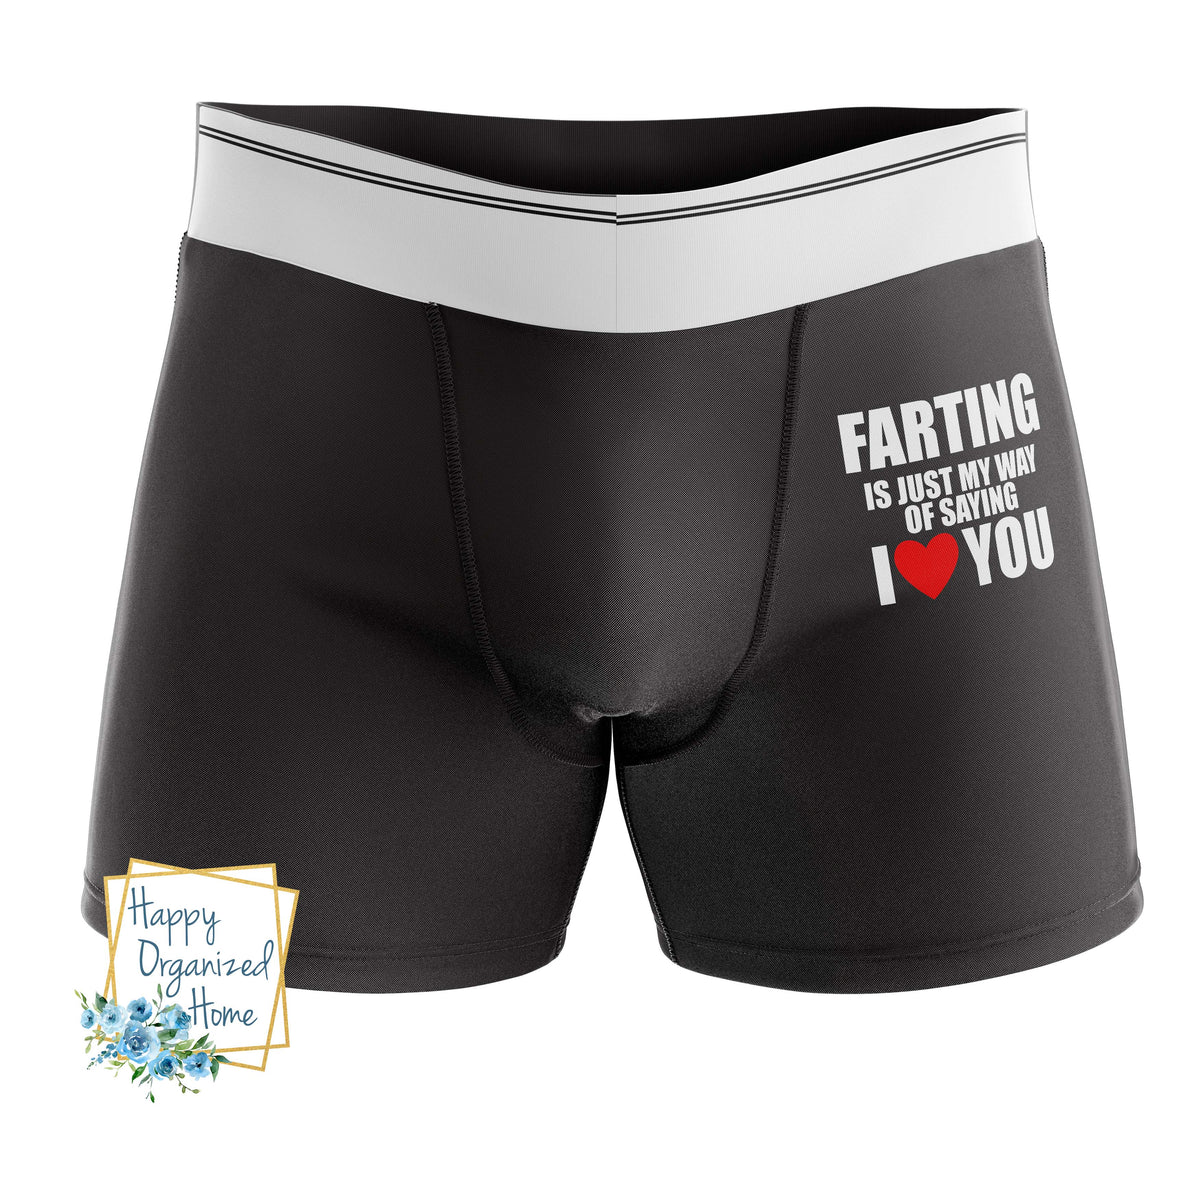 Farting is my way of saying I love you - Men's Naughty Boxer Briefs – Happy  Organized Home